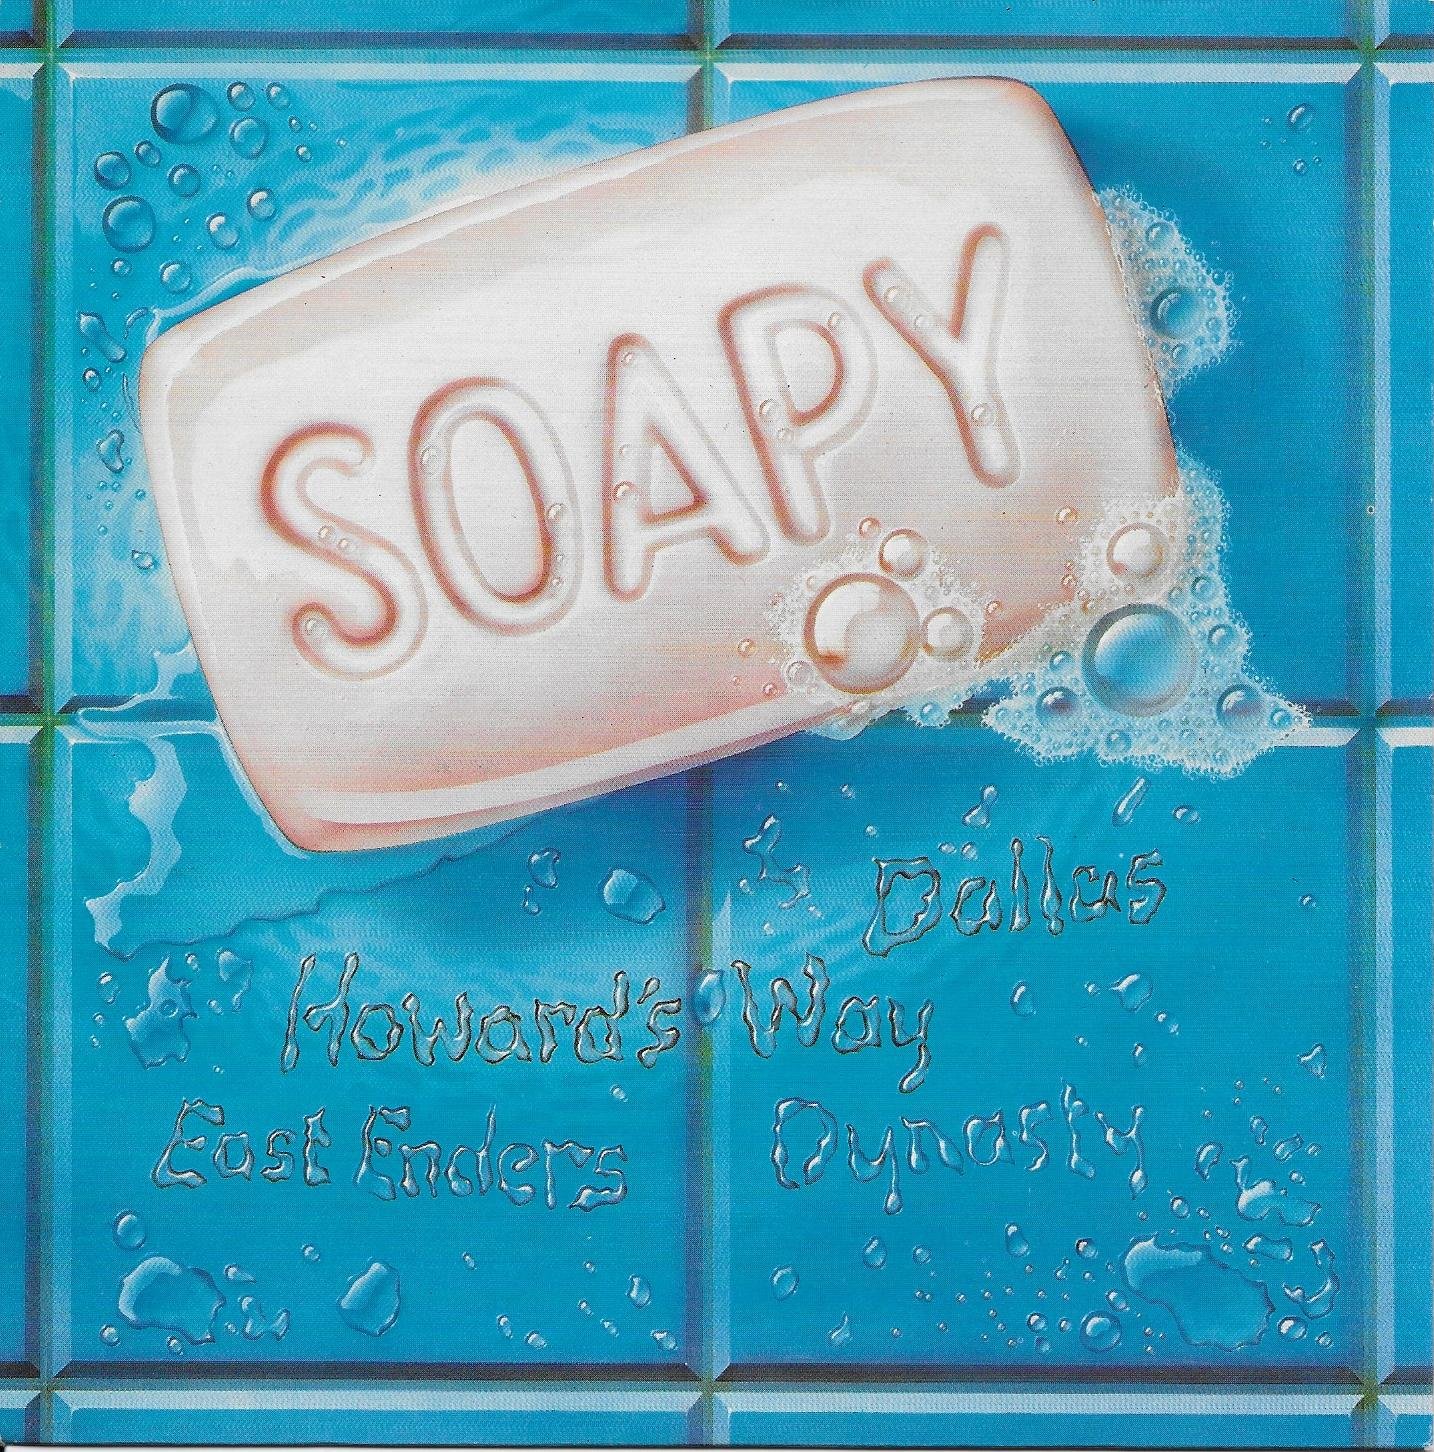 Picture of RESL 206 Soapy by artist Alan Coulthard / Top of the Box from the BBC records and Tapes library